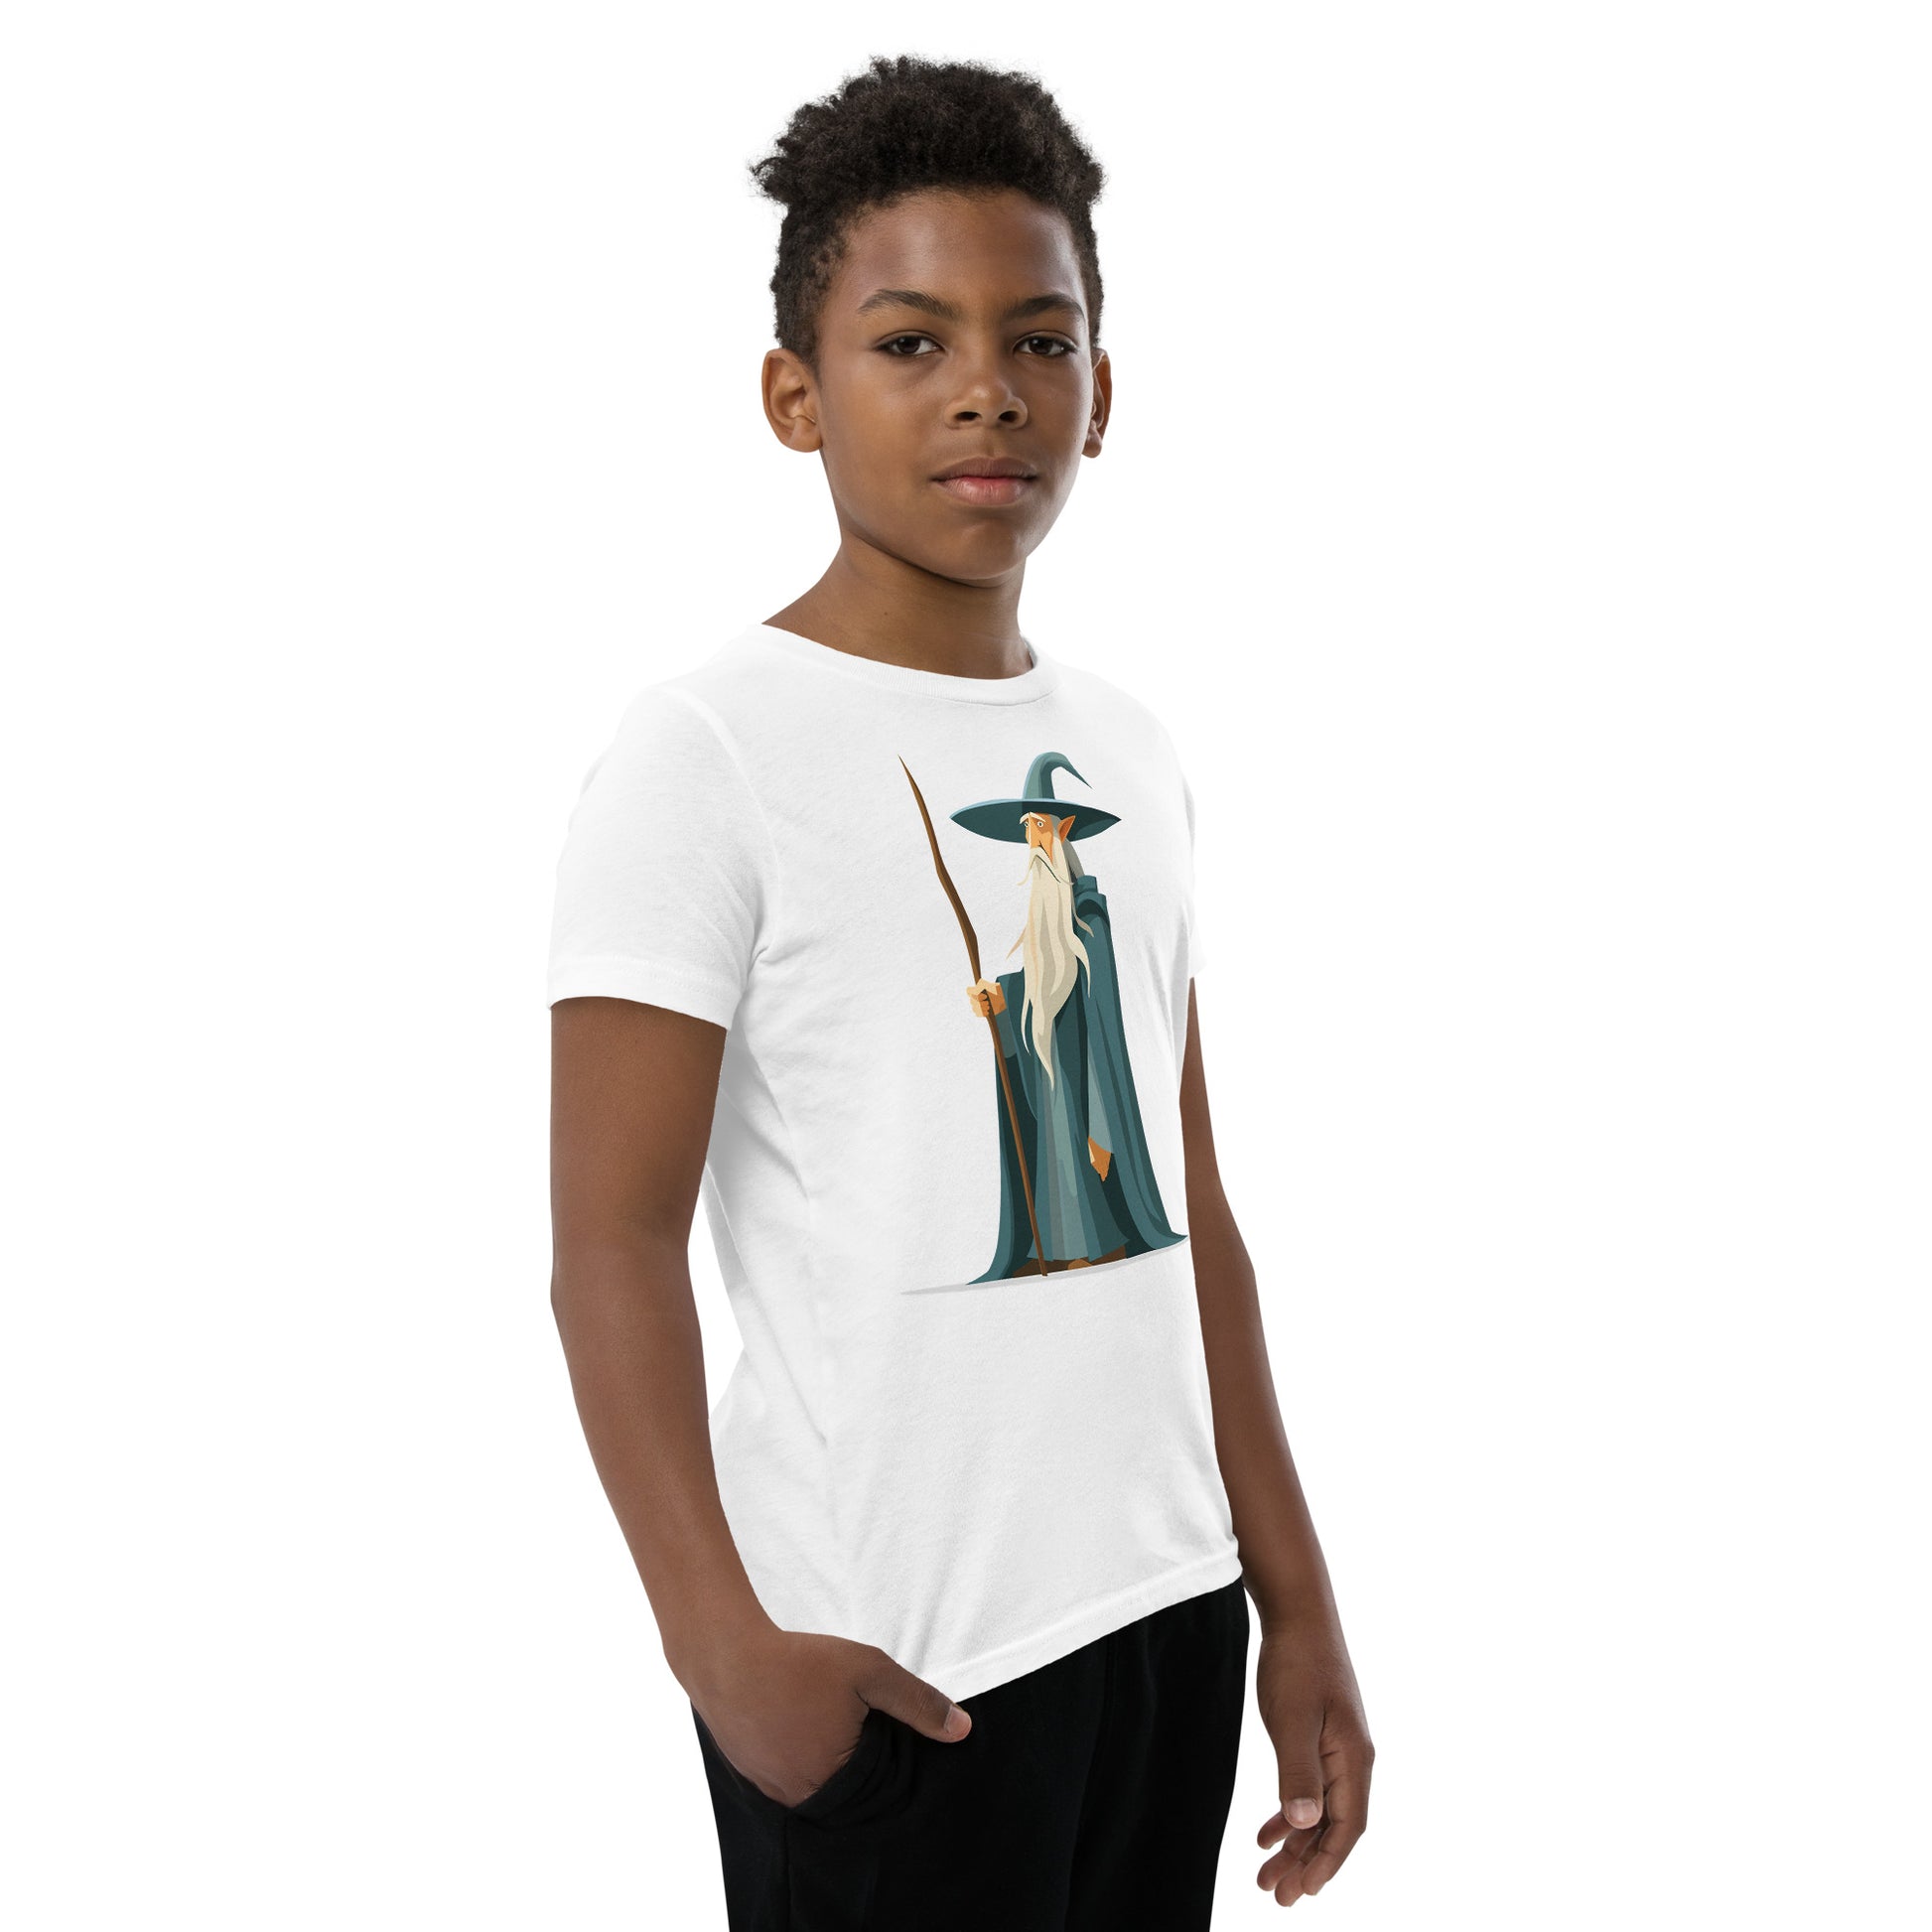 Boy with a white T-shirt with a picture of a magician